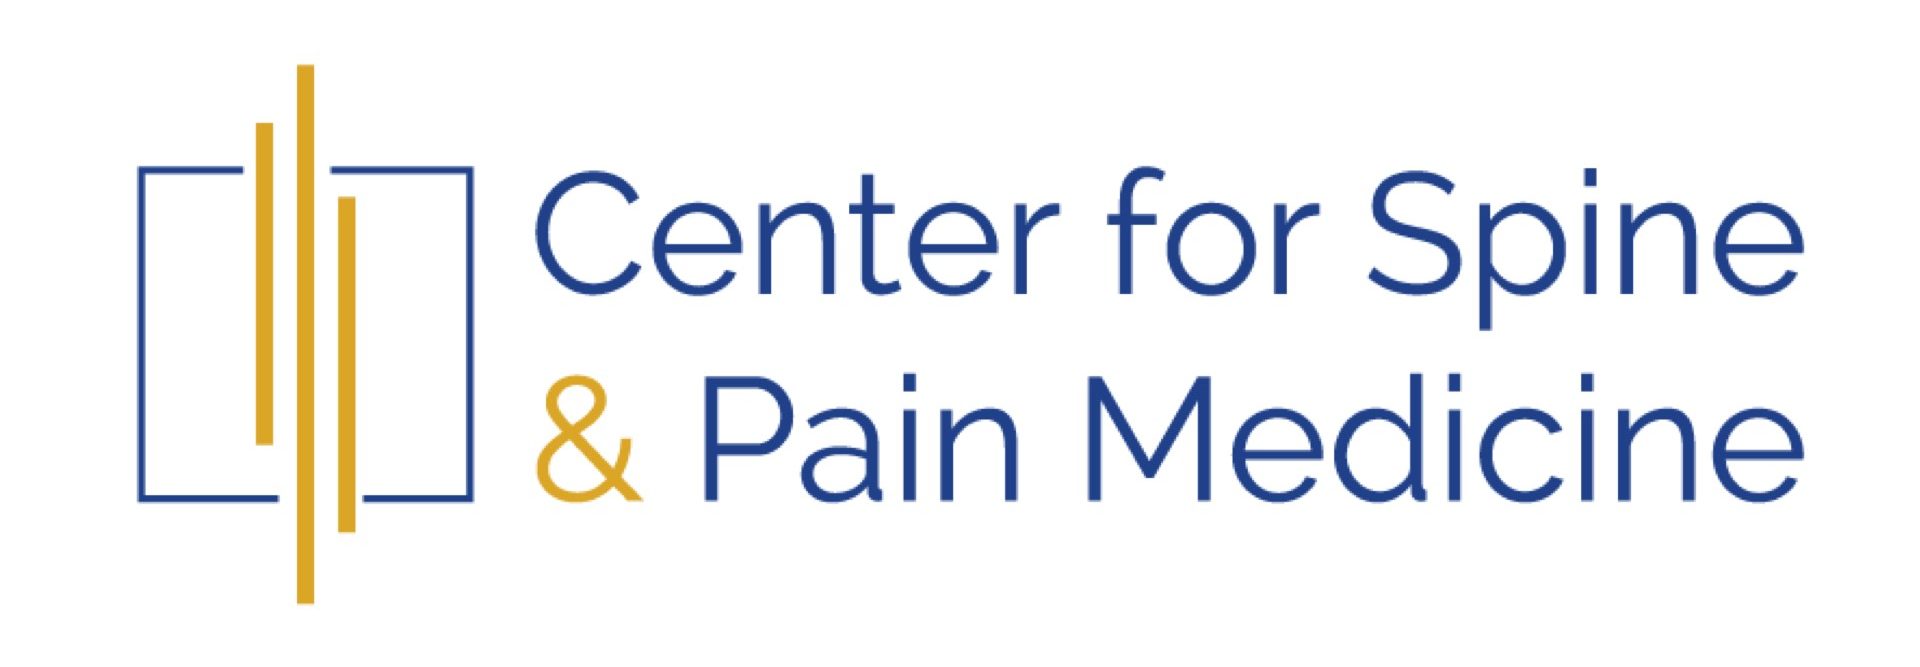 Center for Spine and Pain Medicine logo